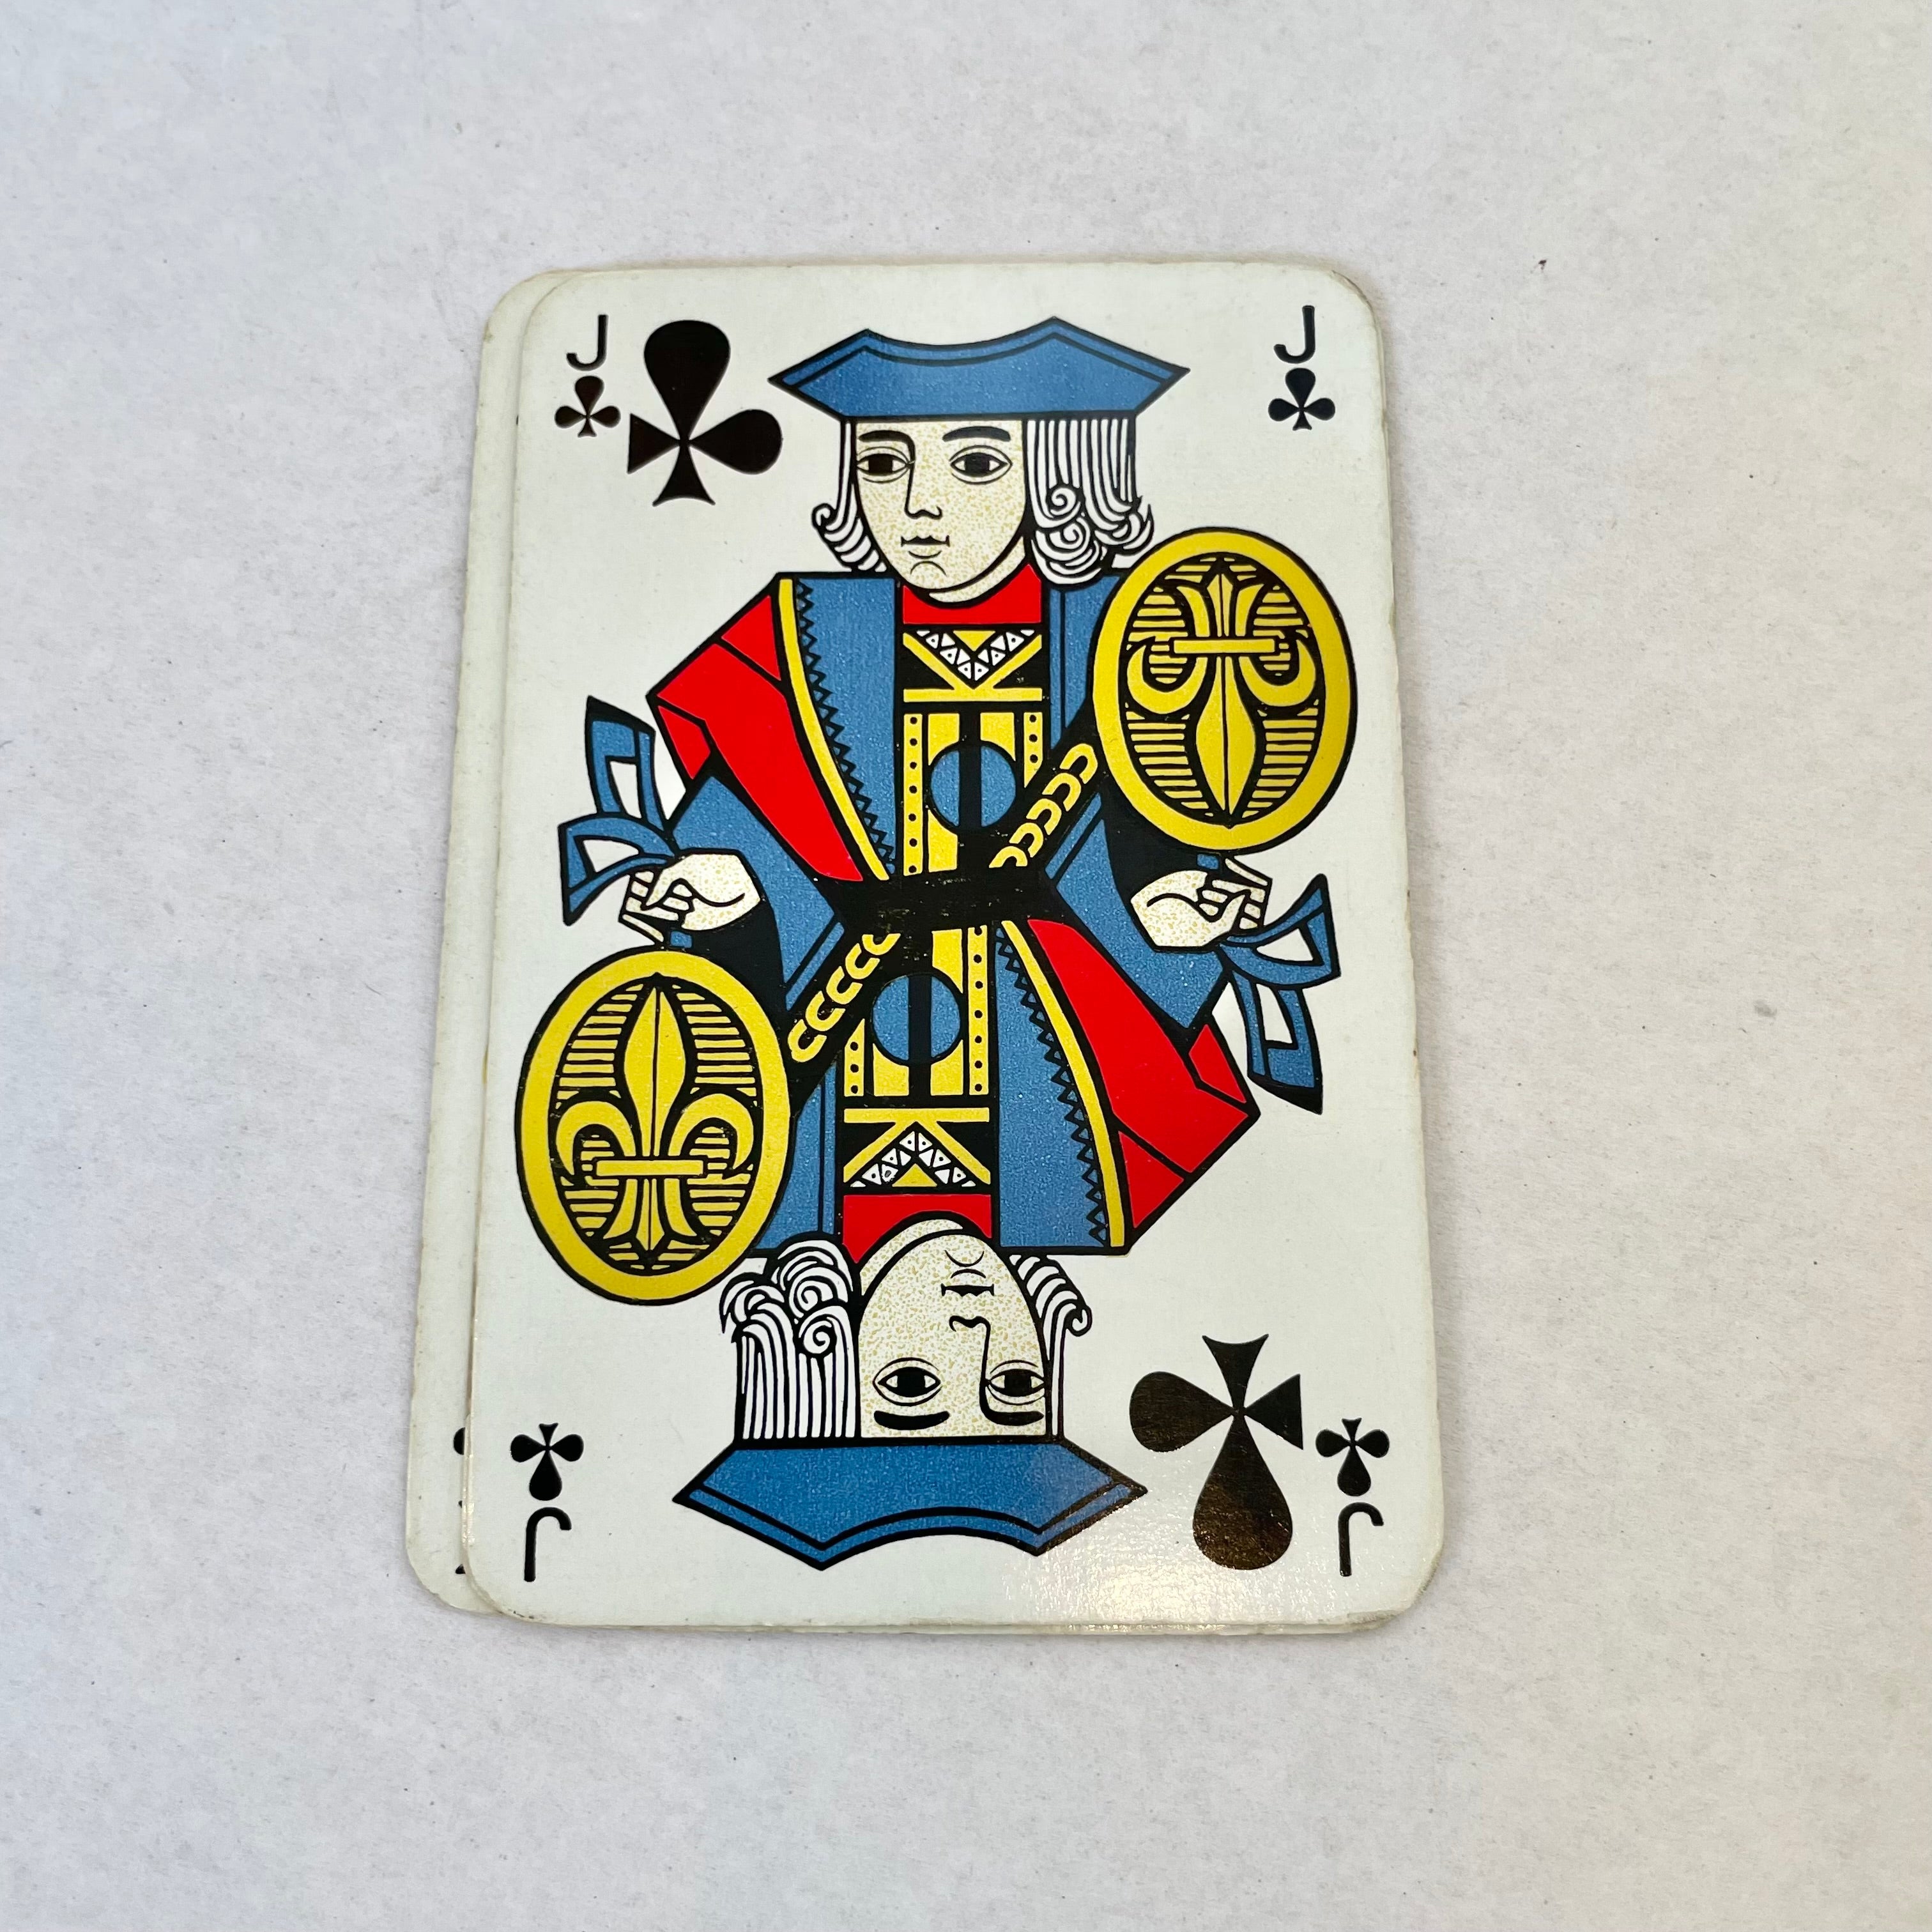 Sold at Auction: TWO PACKS OF HERMES PLAYING CARDS, in an original